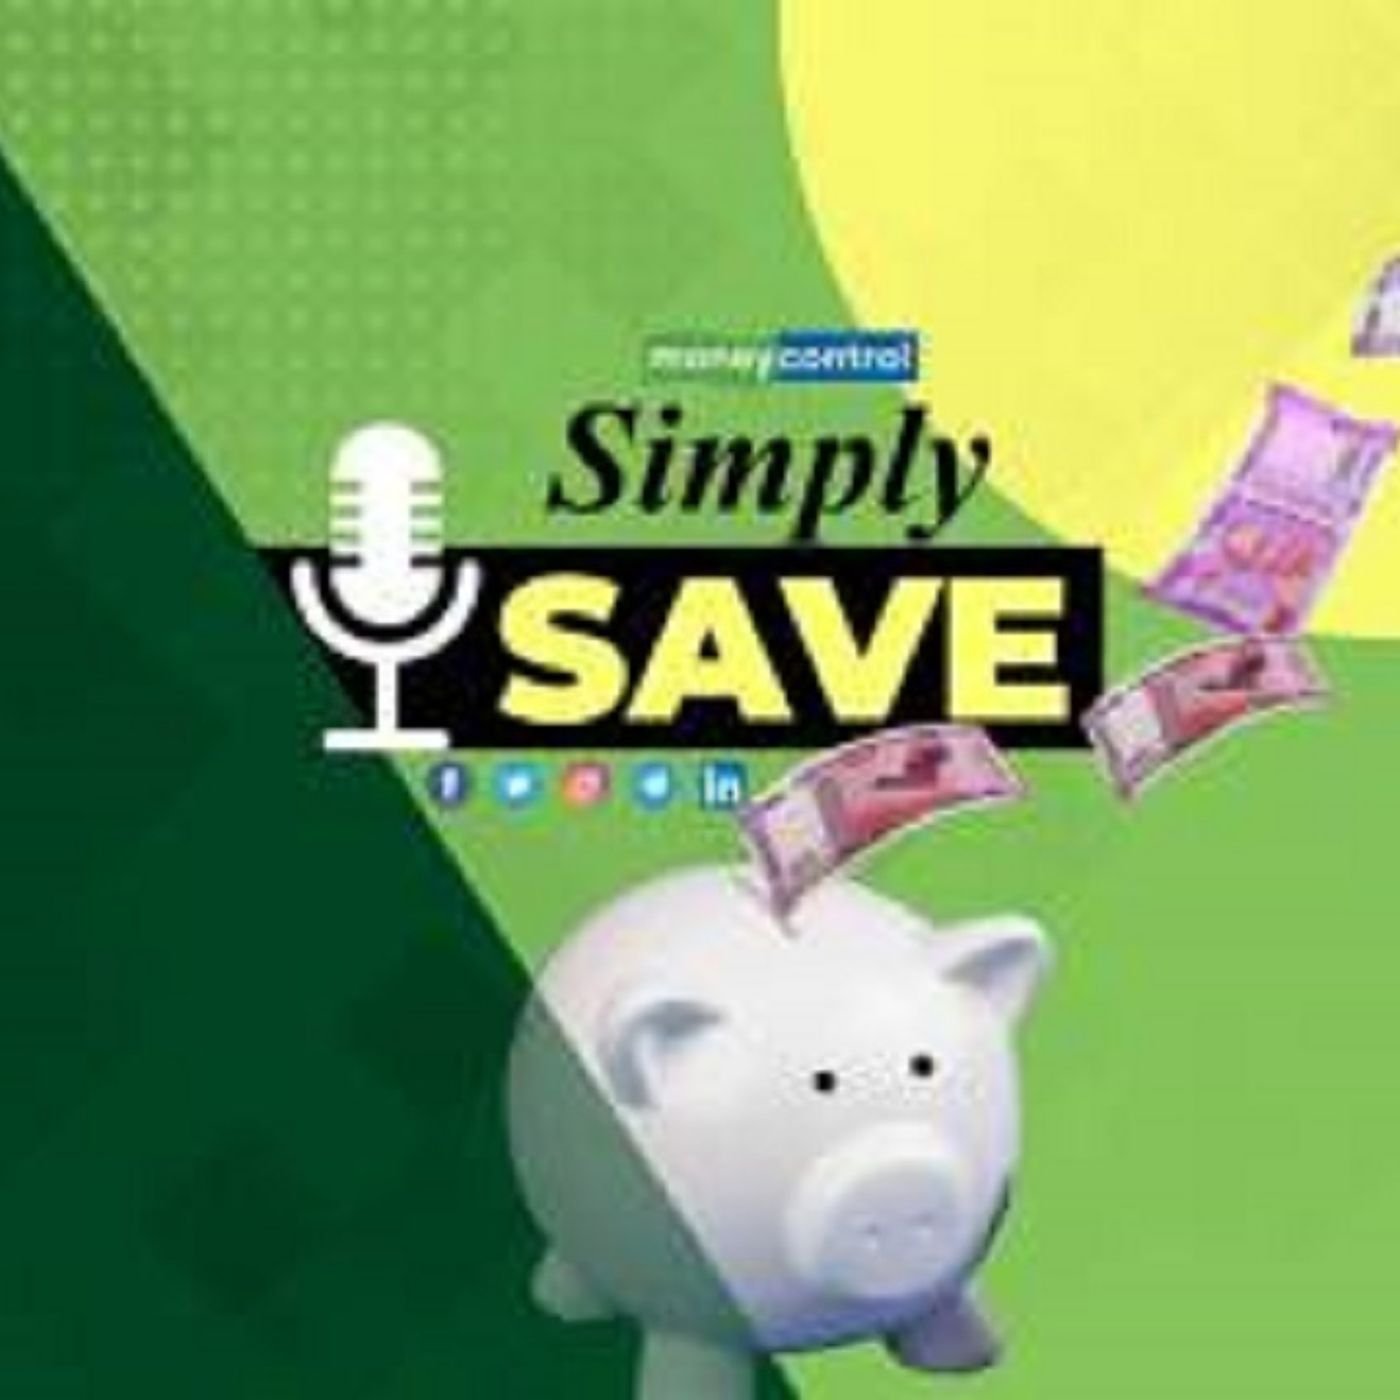 4215: How much money do you need for your retirement? Simply Save